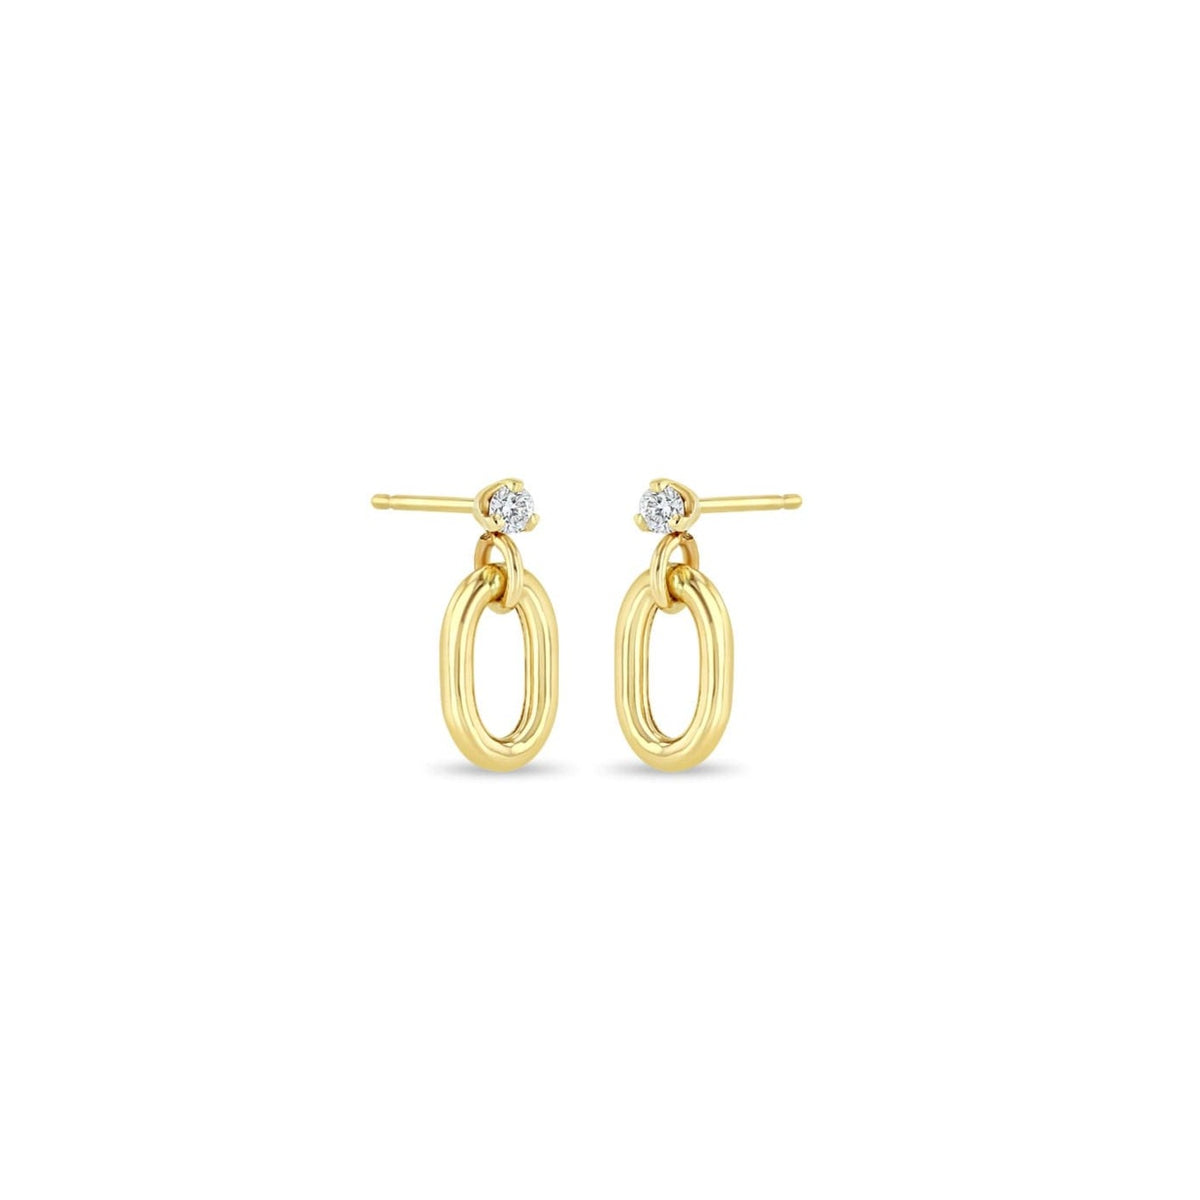 Zoe Chicco Large Square Oval Link Earrings in Yellow Gold/Diamond